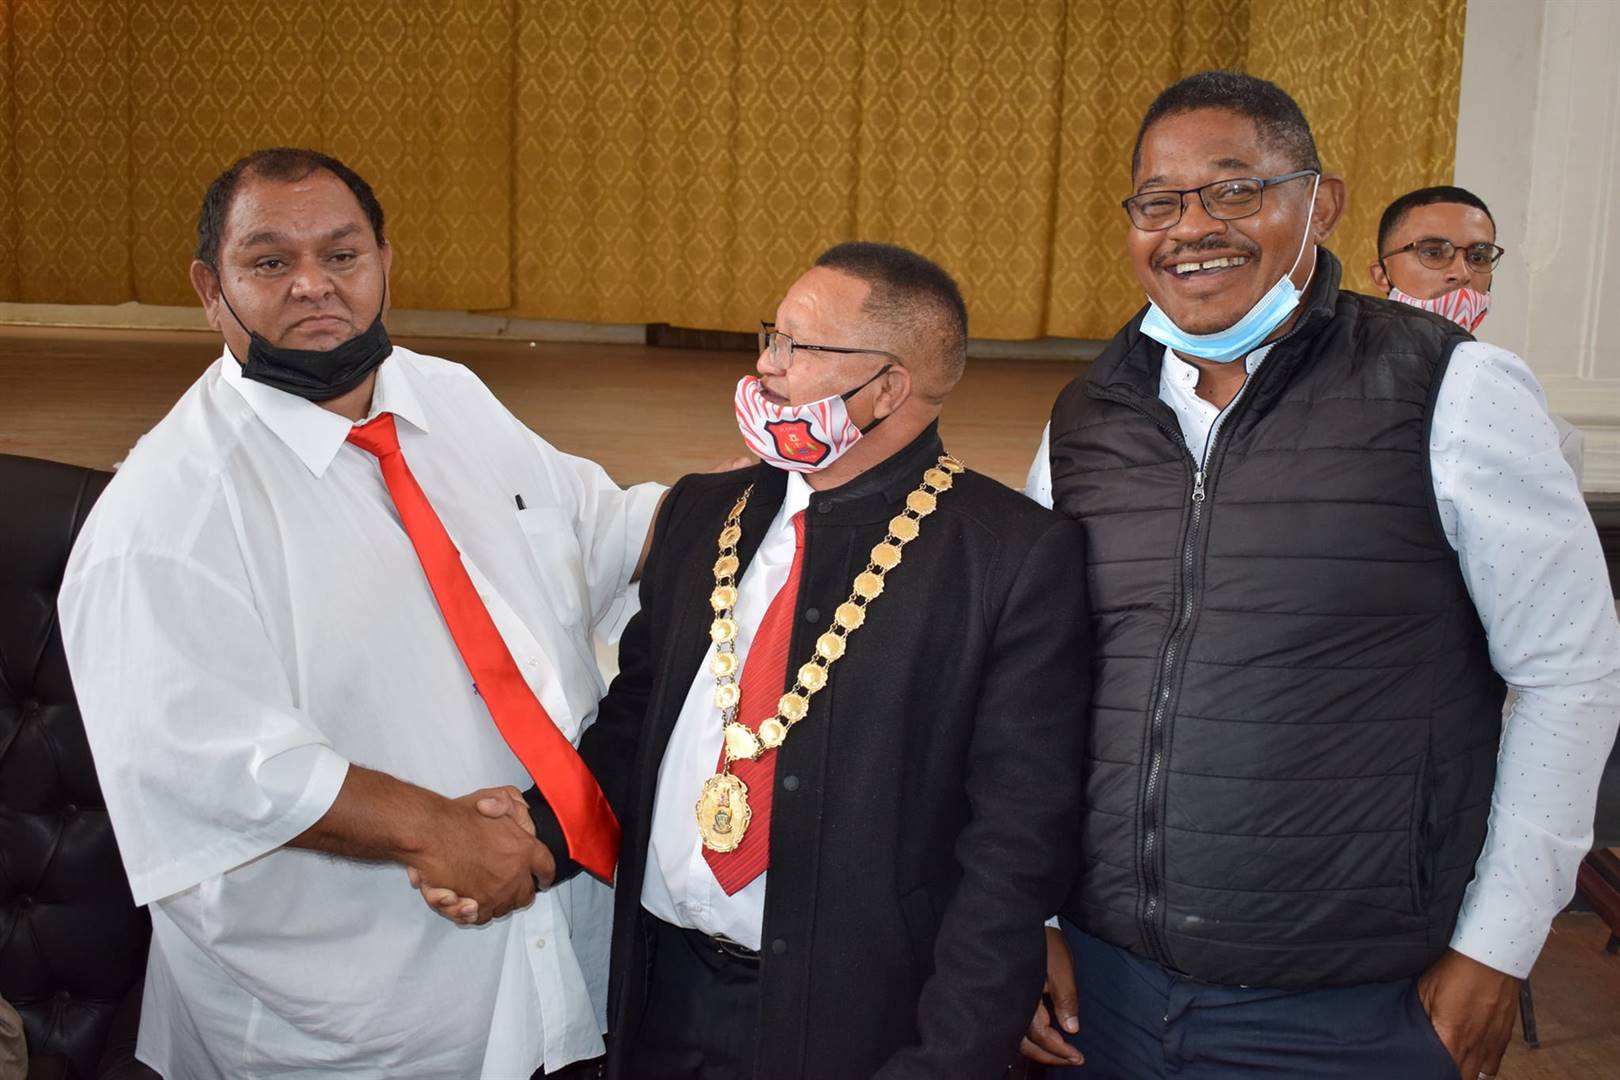 ICOSA councillor Hyrin Ruiters congratulates convicted child rapist Jeffrey Donson with his election as Kannaland mayor, with his deputy, convicted fraudster Werner Meshoa also in attendance.